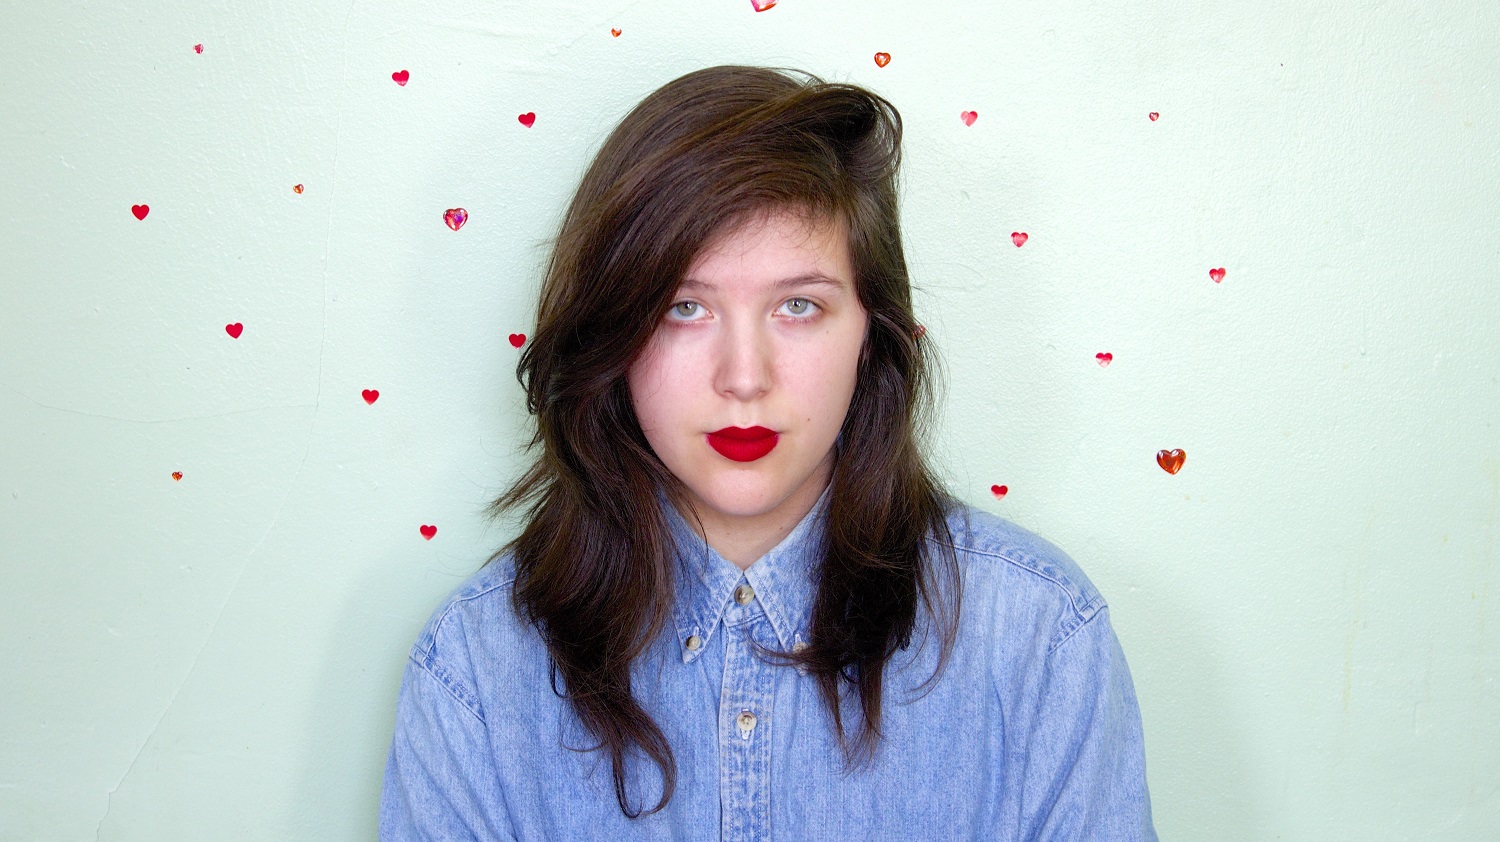 lucydacus1